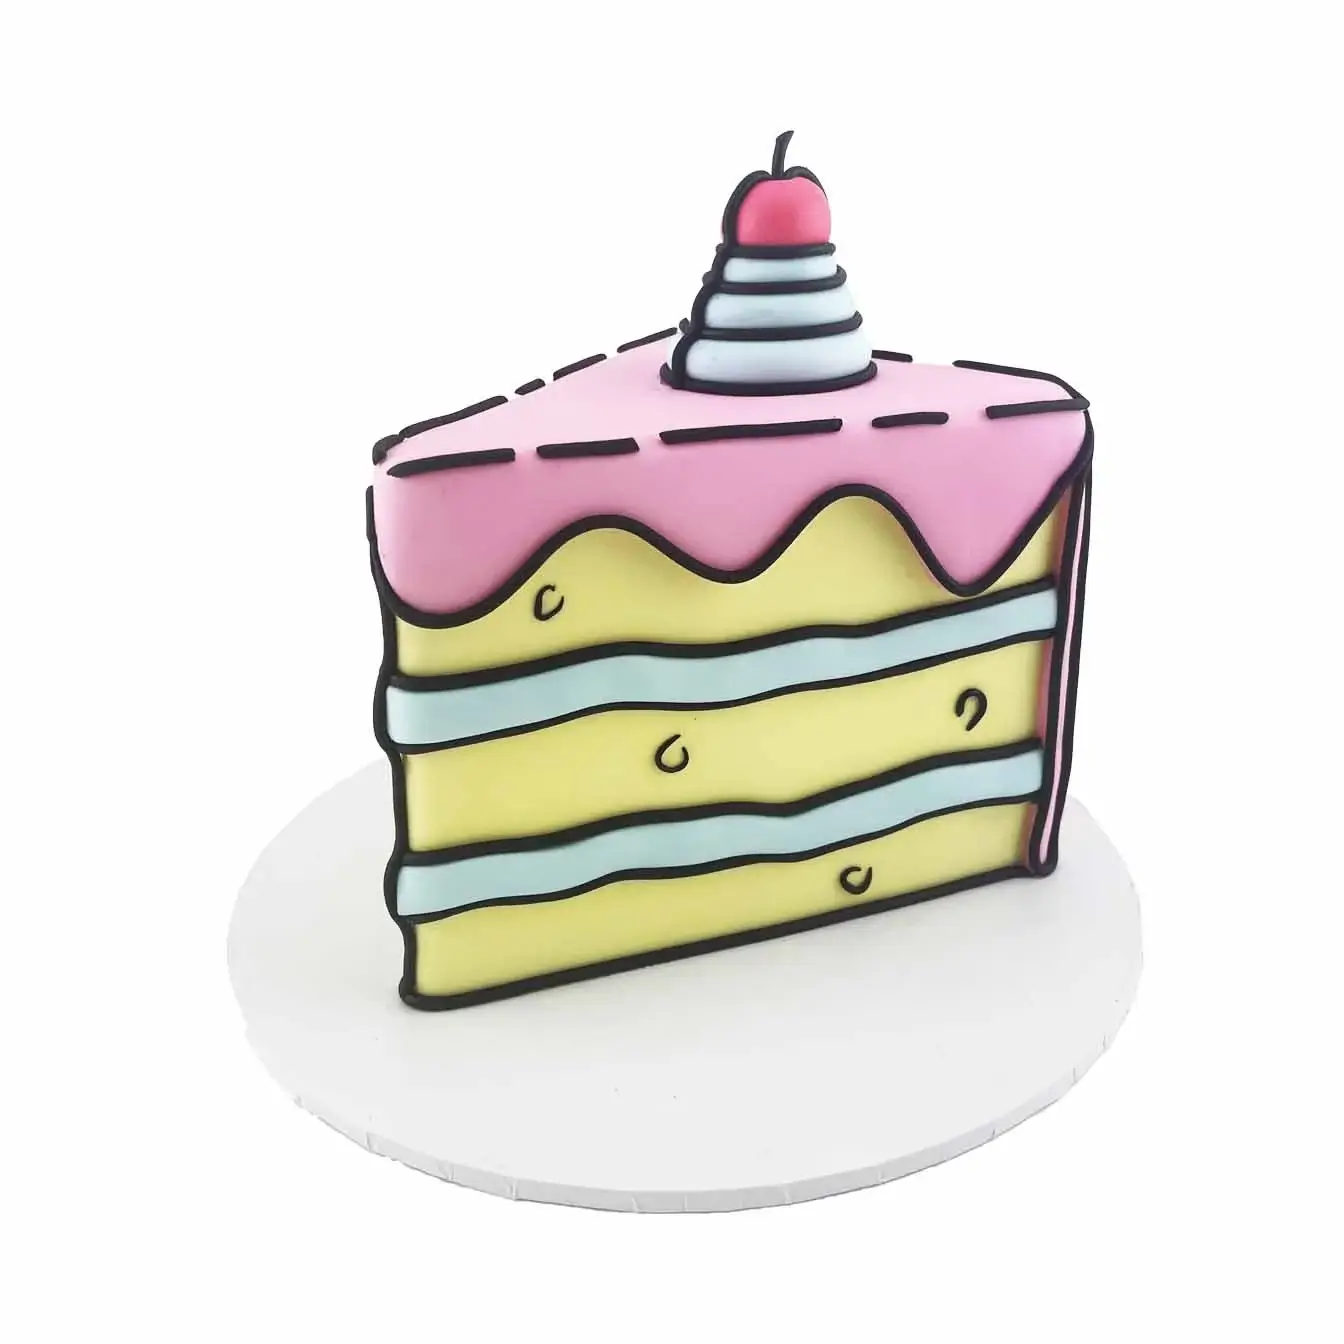 Cartoon-style cake with pink, yellow, and blue layers, decorated with a fun and playful design.